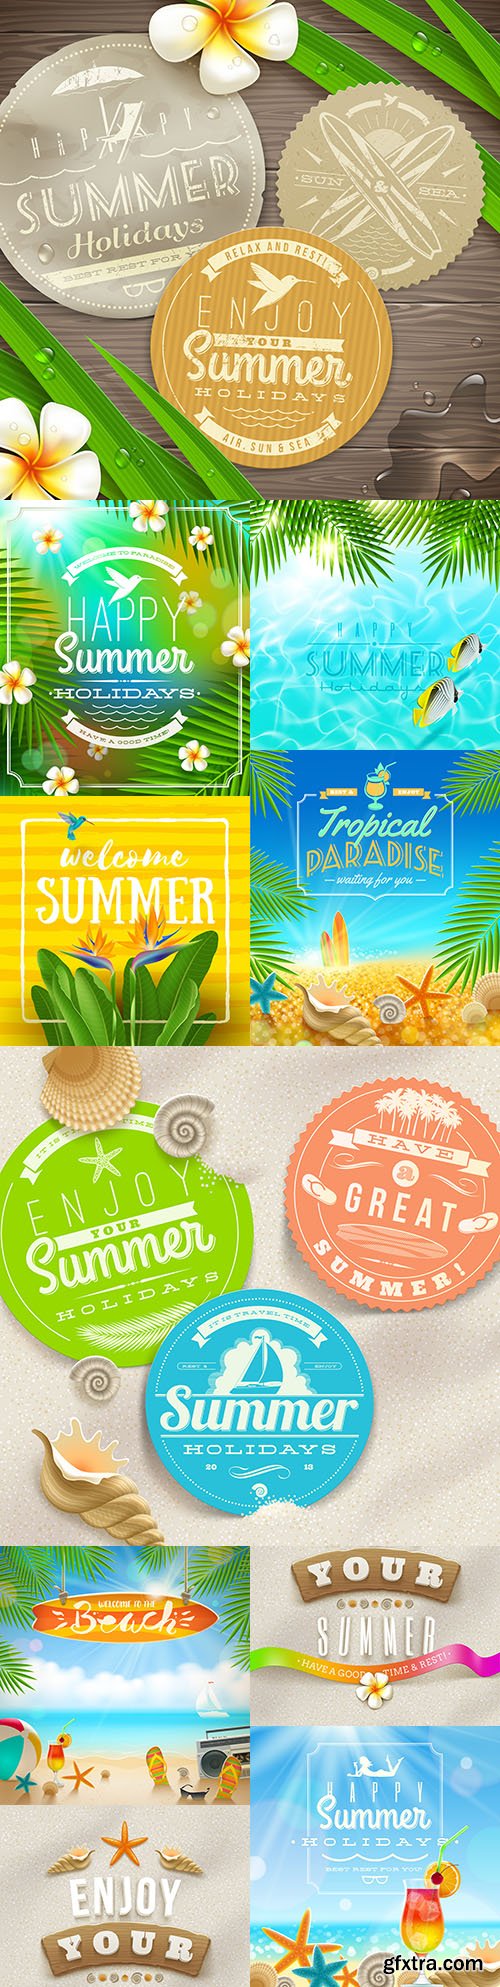 Summer holidays with tropical flowers on wooden surface illustration